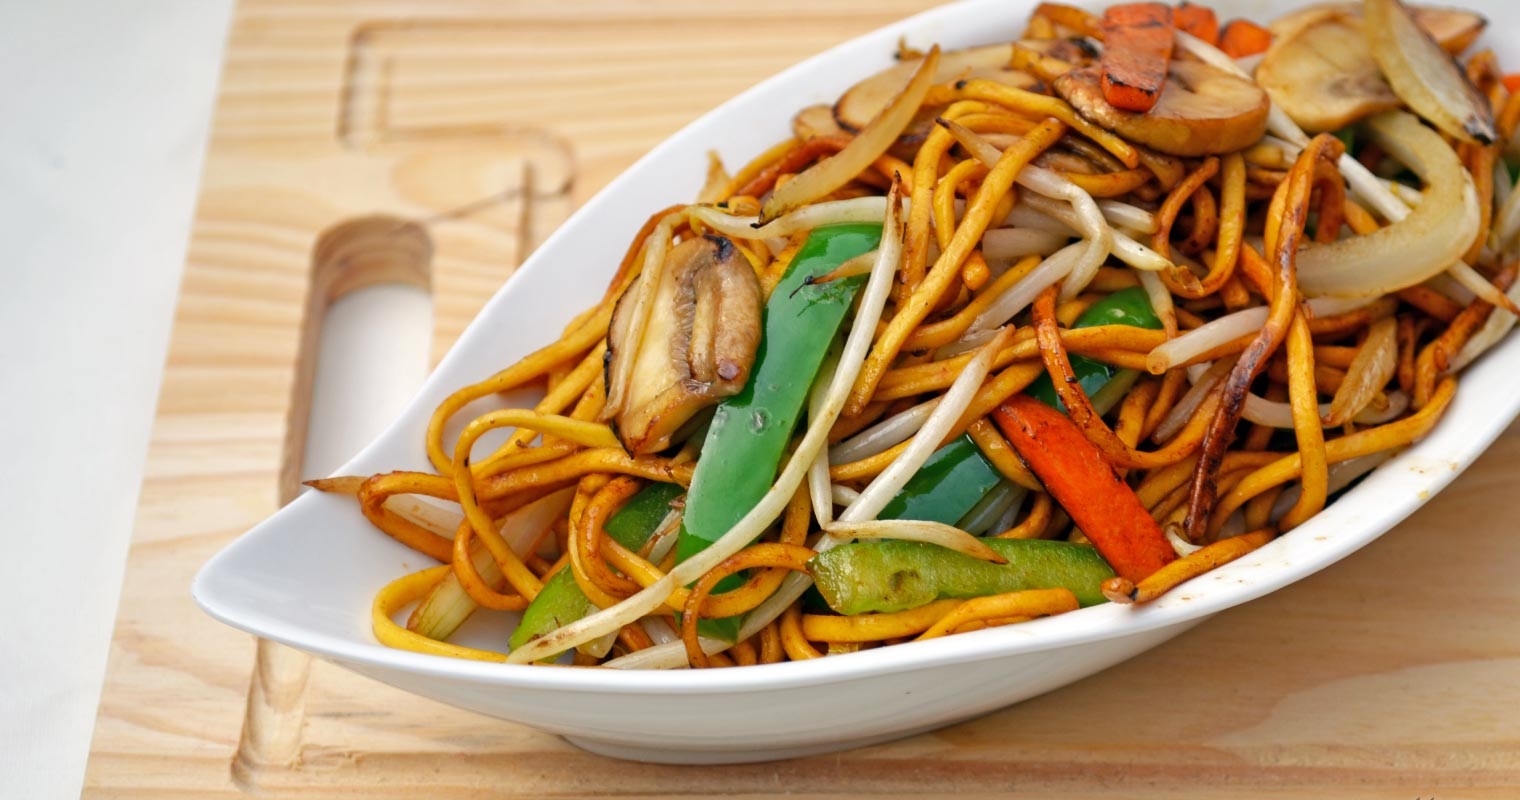 Dhoomley Chowmein Noodles Photos Image And Wallpaper